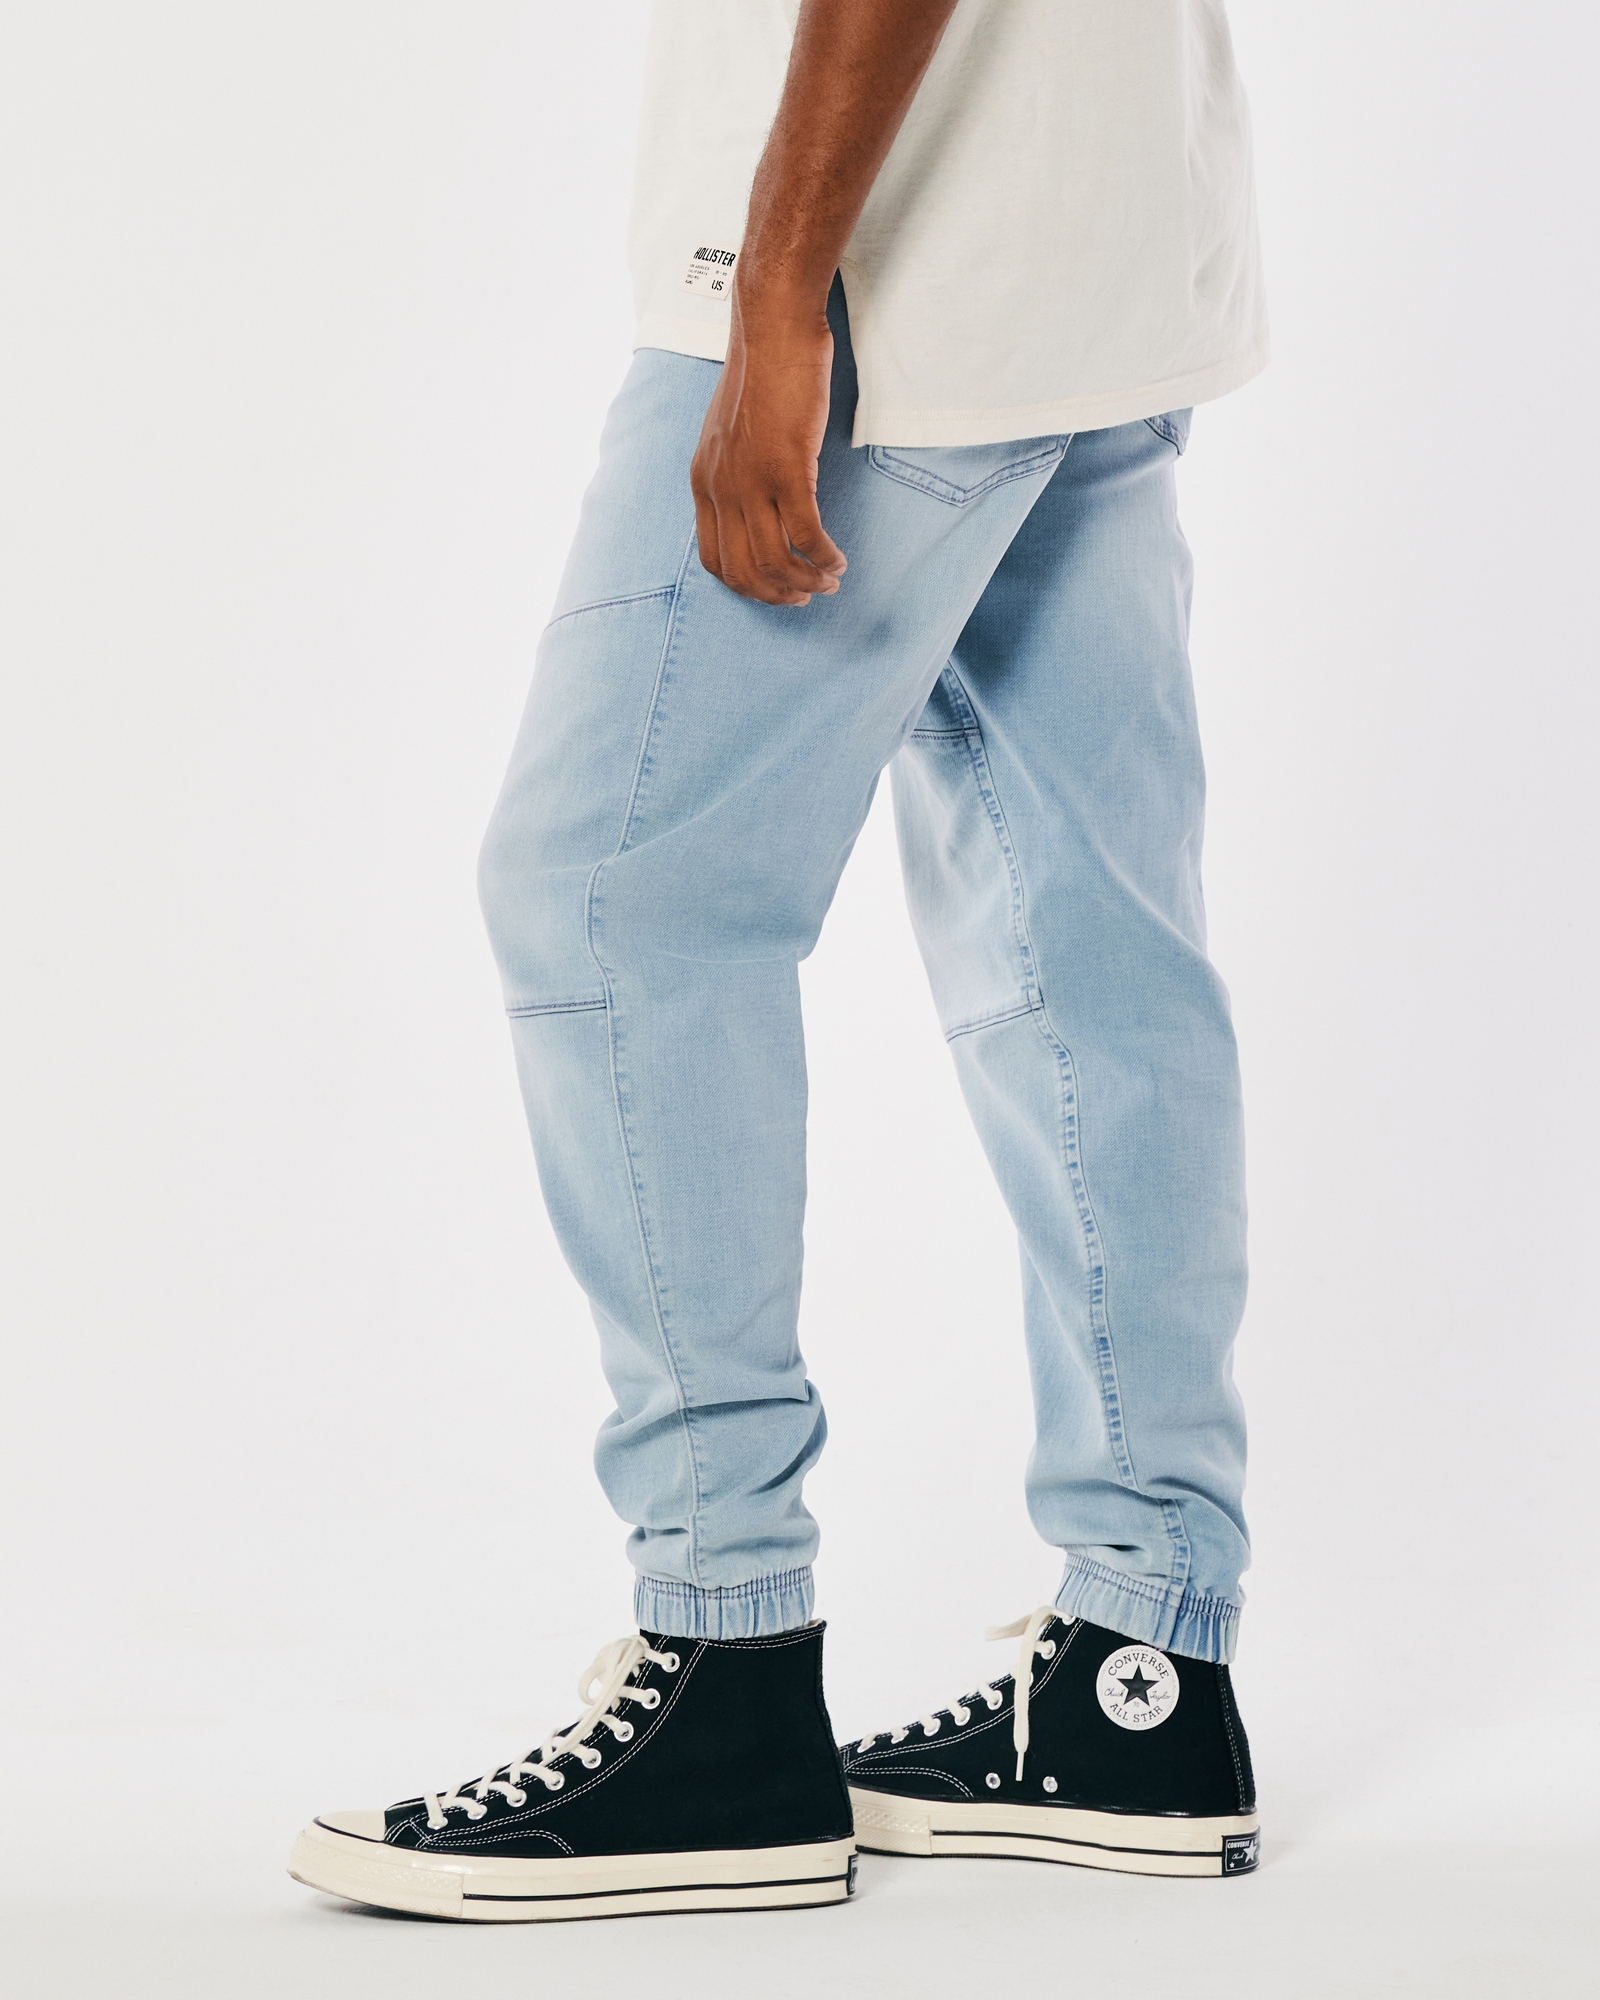 Men's Dark Wash Just Like Knit Relaxed Denim Joggers